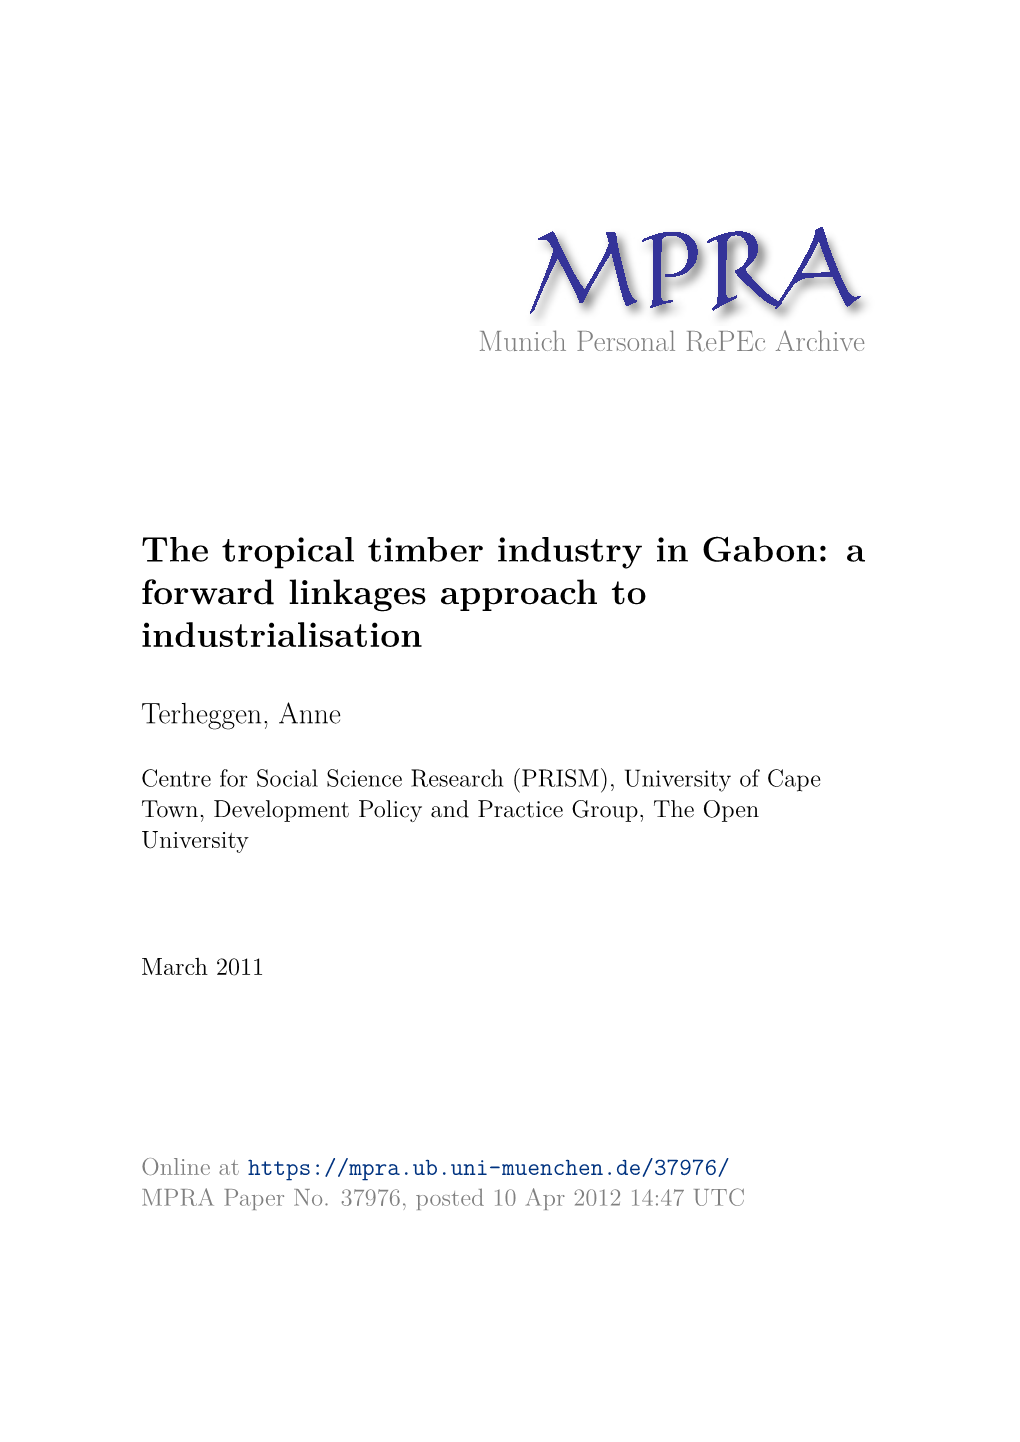 The Tropical Timber Industry in Gabon: a Forward Linkages Approach to Industrialisation